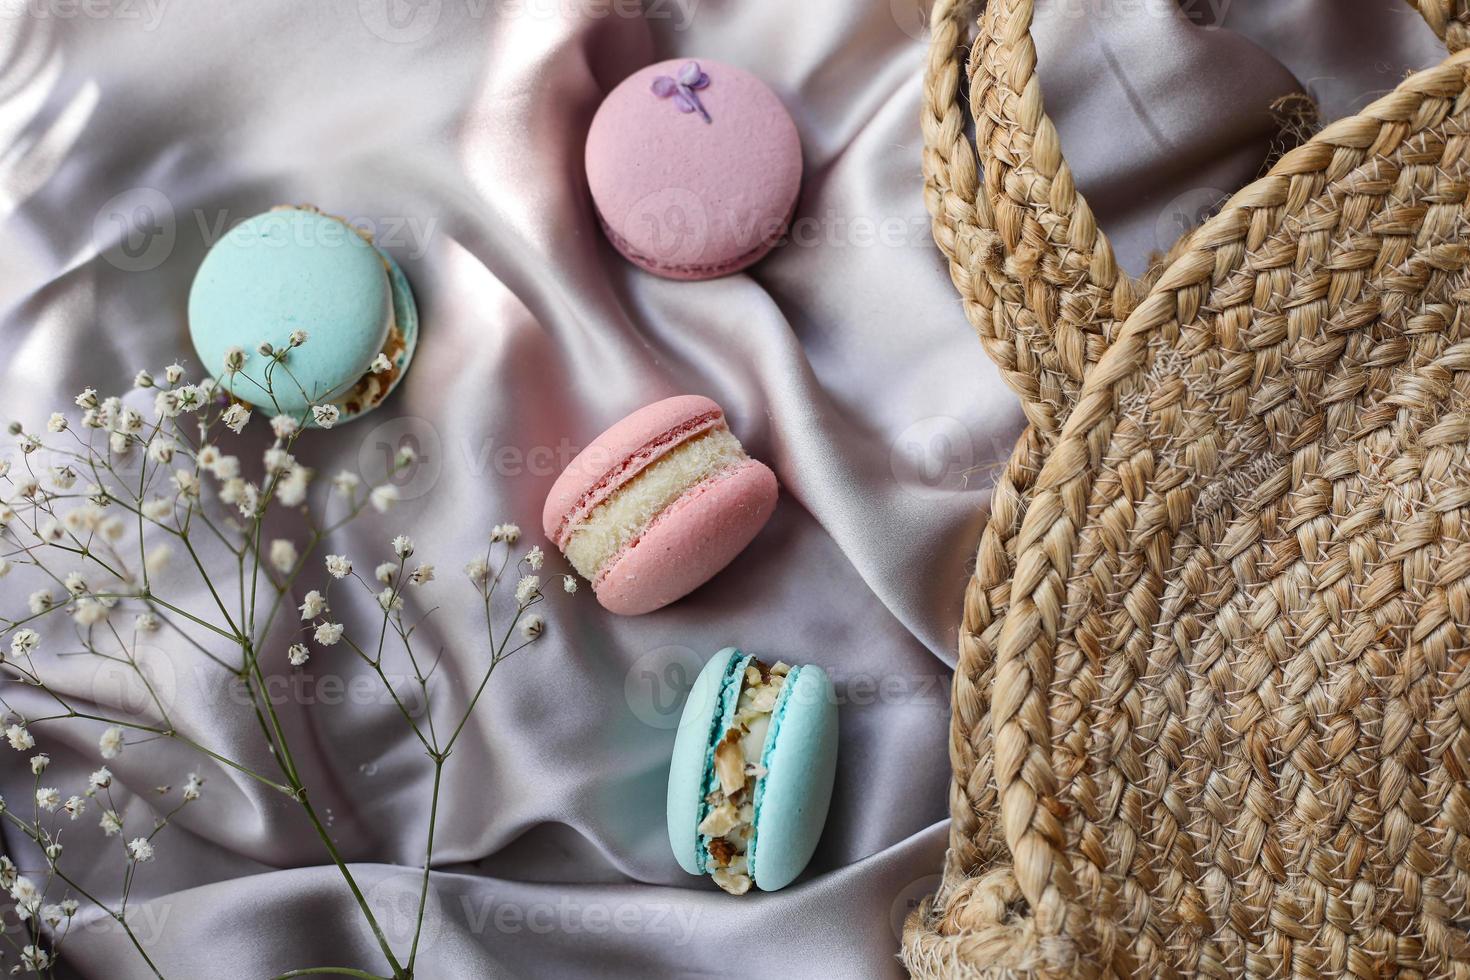 pink and mint french macaroons or macarons cookies and a white flowers on a cloth background. Natural fruit and berry flavors, creamy stuffing for valentines mother day easter with love food photo